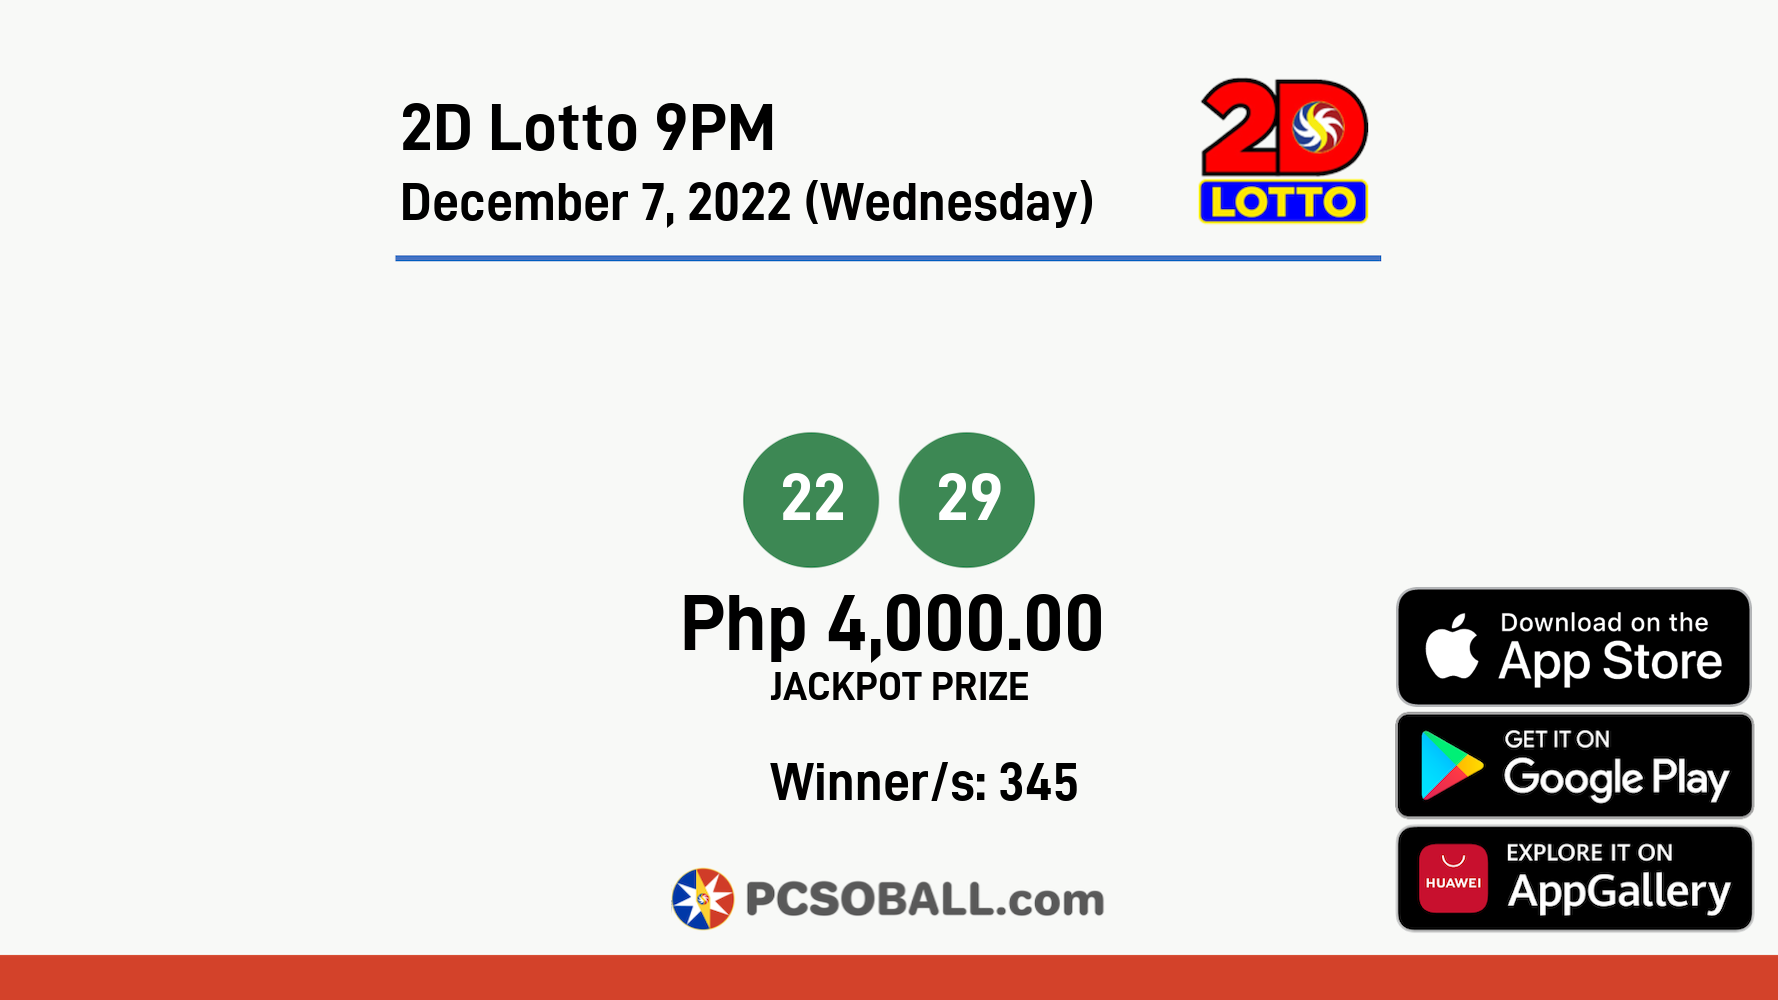 2D Lotto 9PM December 7, 2022 (Wednesday) Result